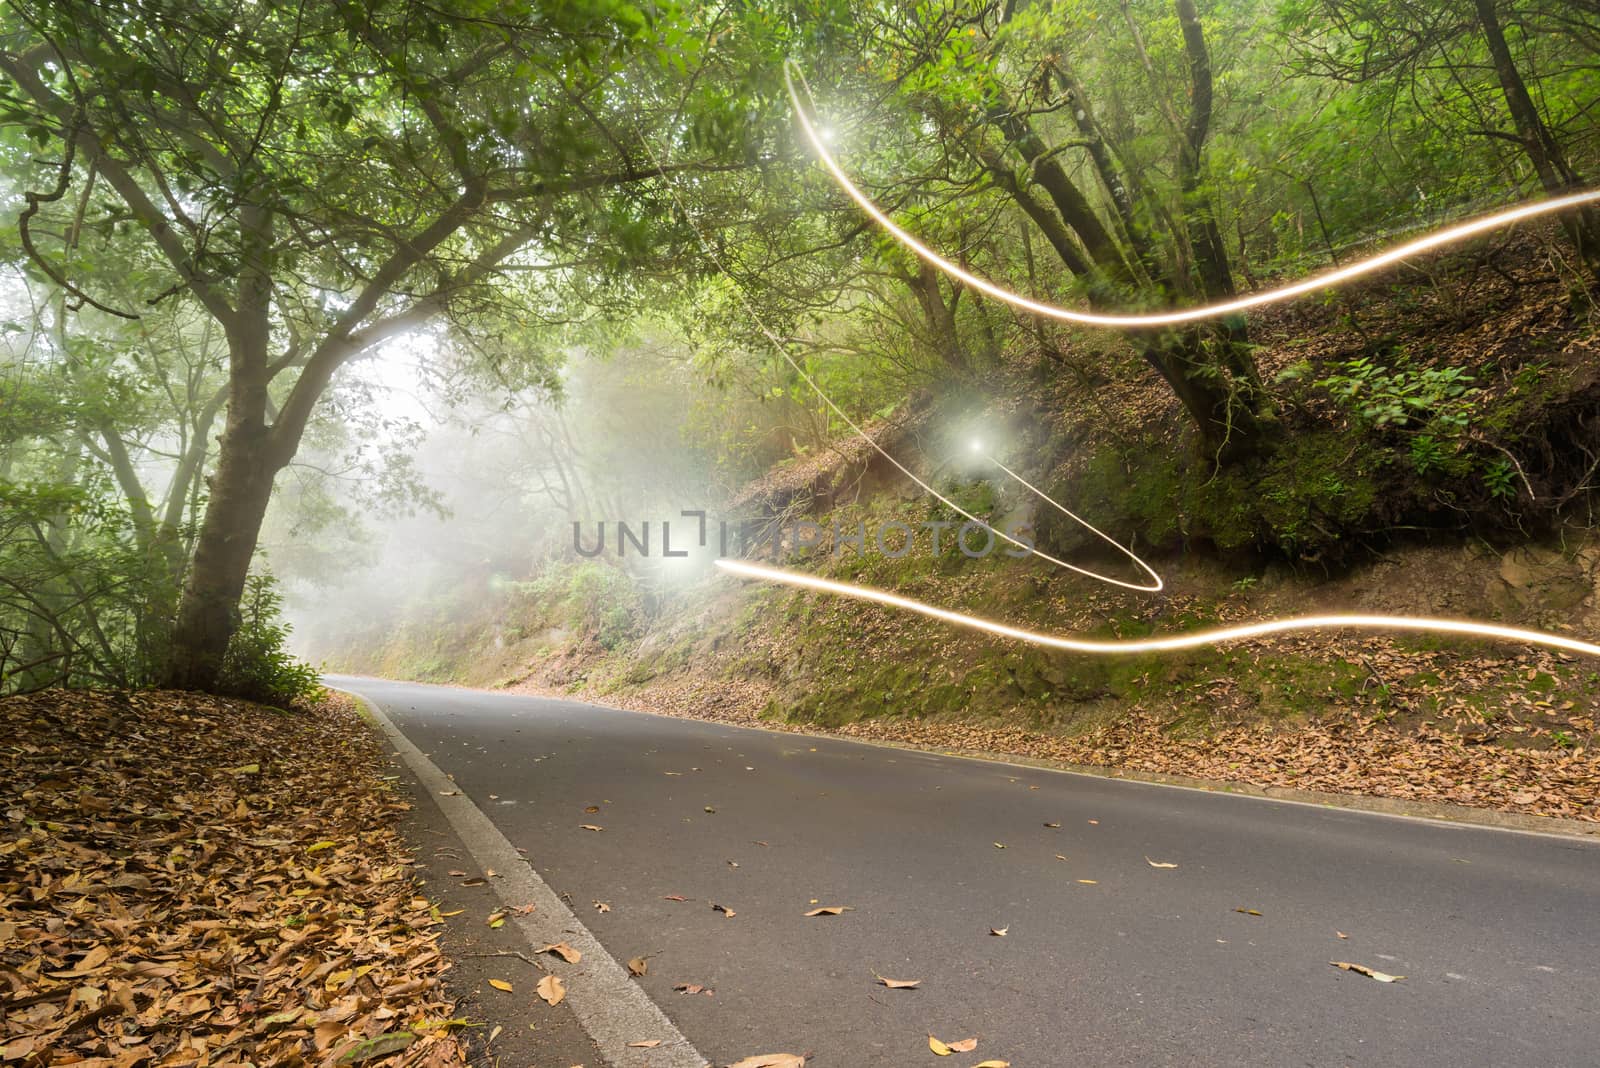 Road in the magic forest, light trails through the myst, fairy tale scenary, version 2. by HERRAEZ